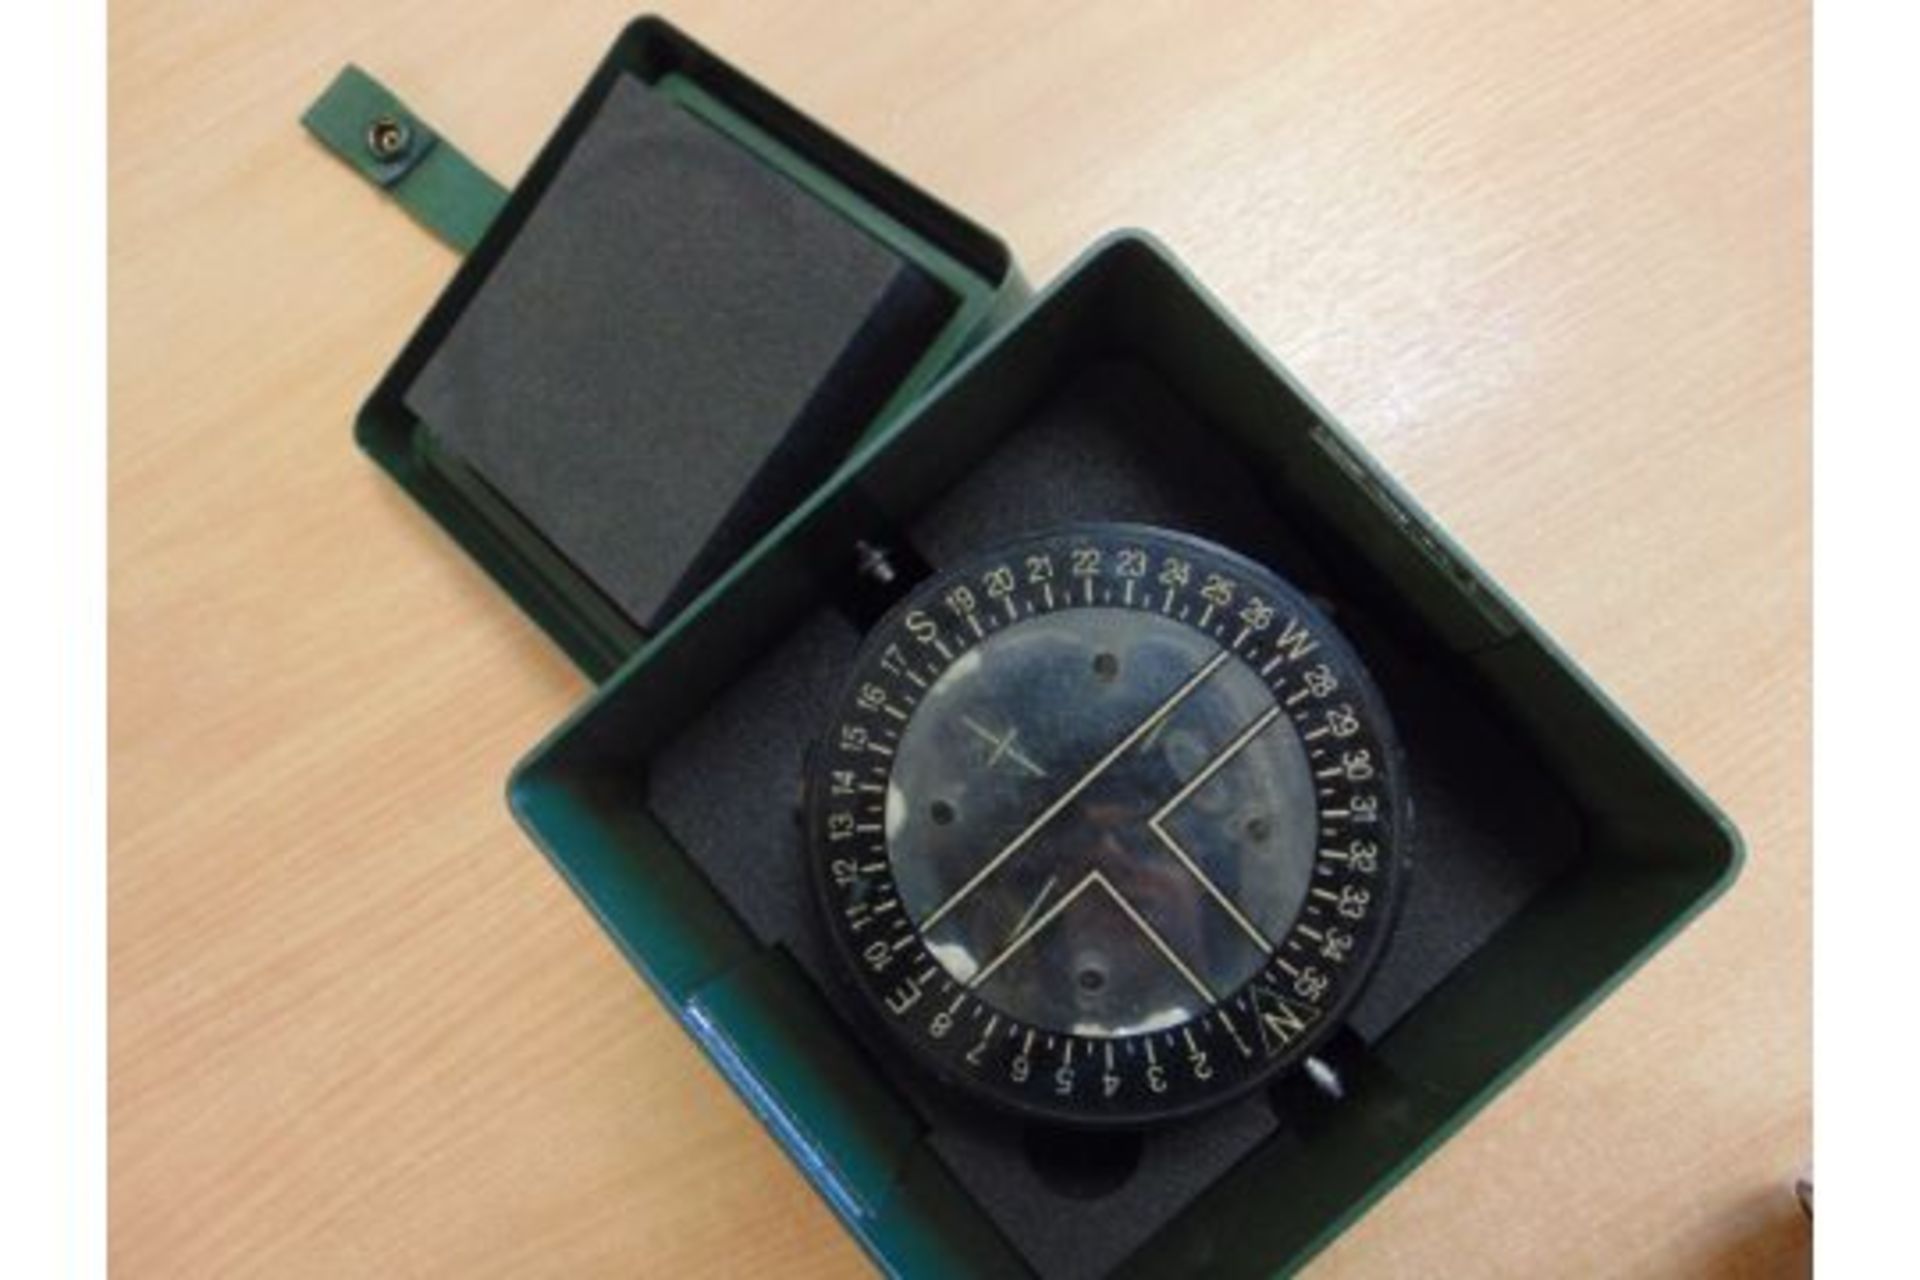 V. NICE SIRS NAVUGATION CANOE COMPASS USED BY SAS, SBS, ETC IN ORIGINAL TRANSIT CASE